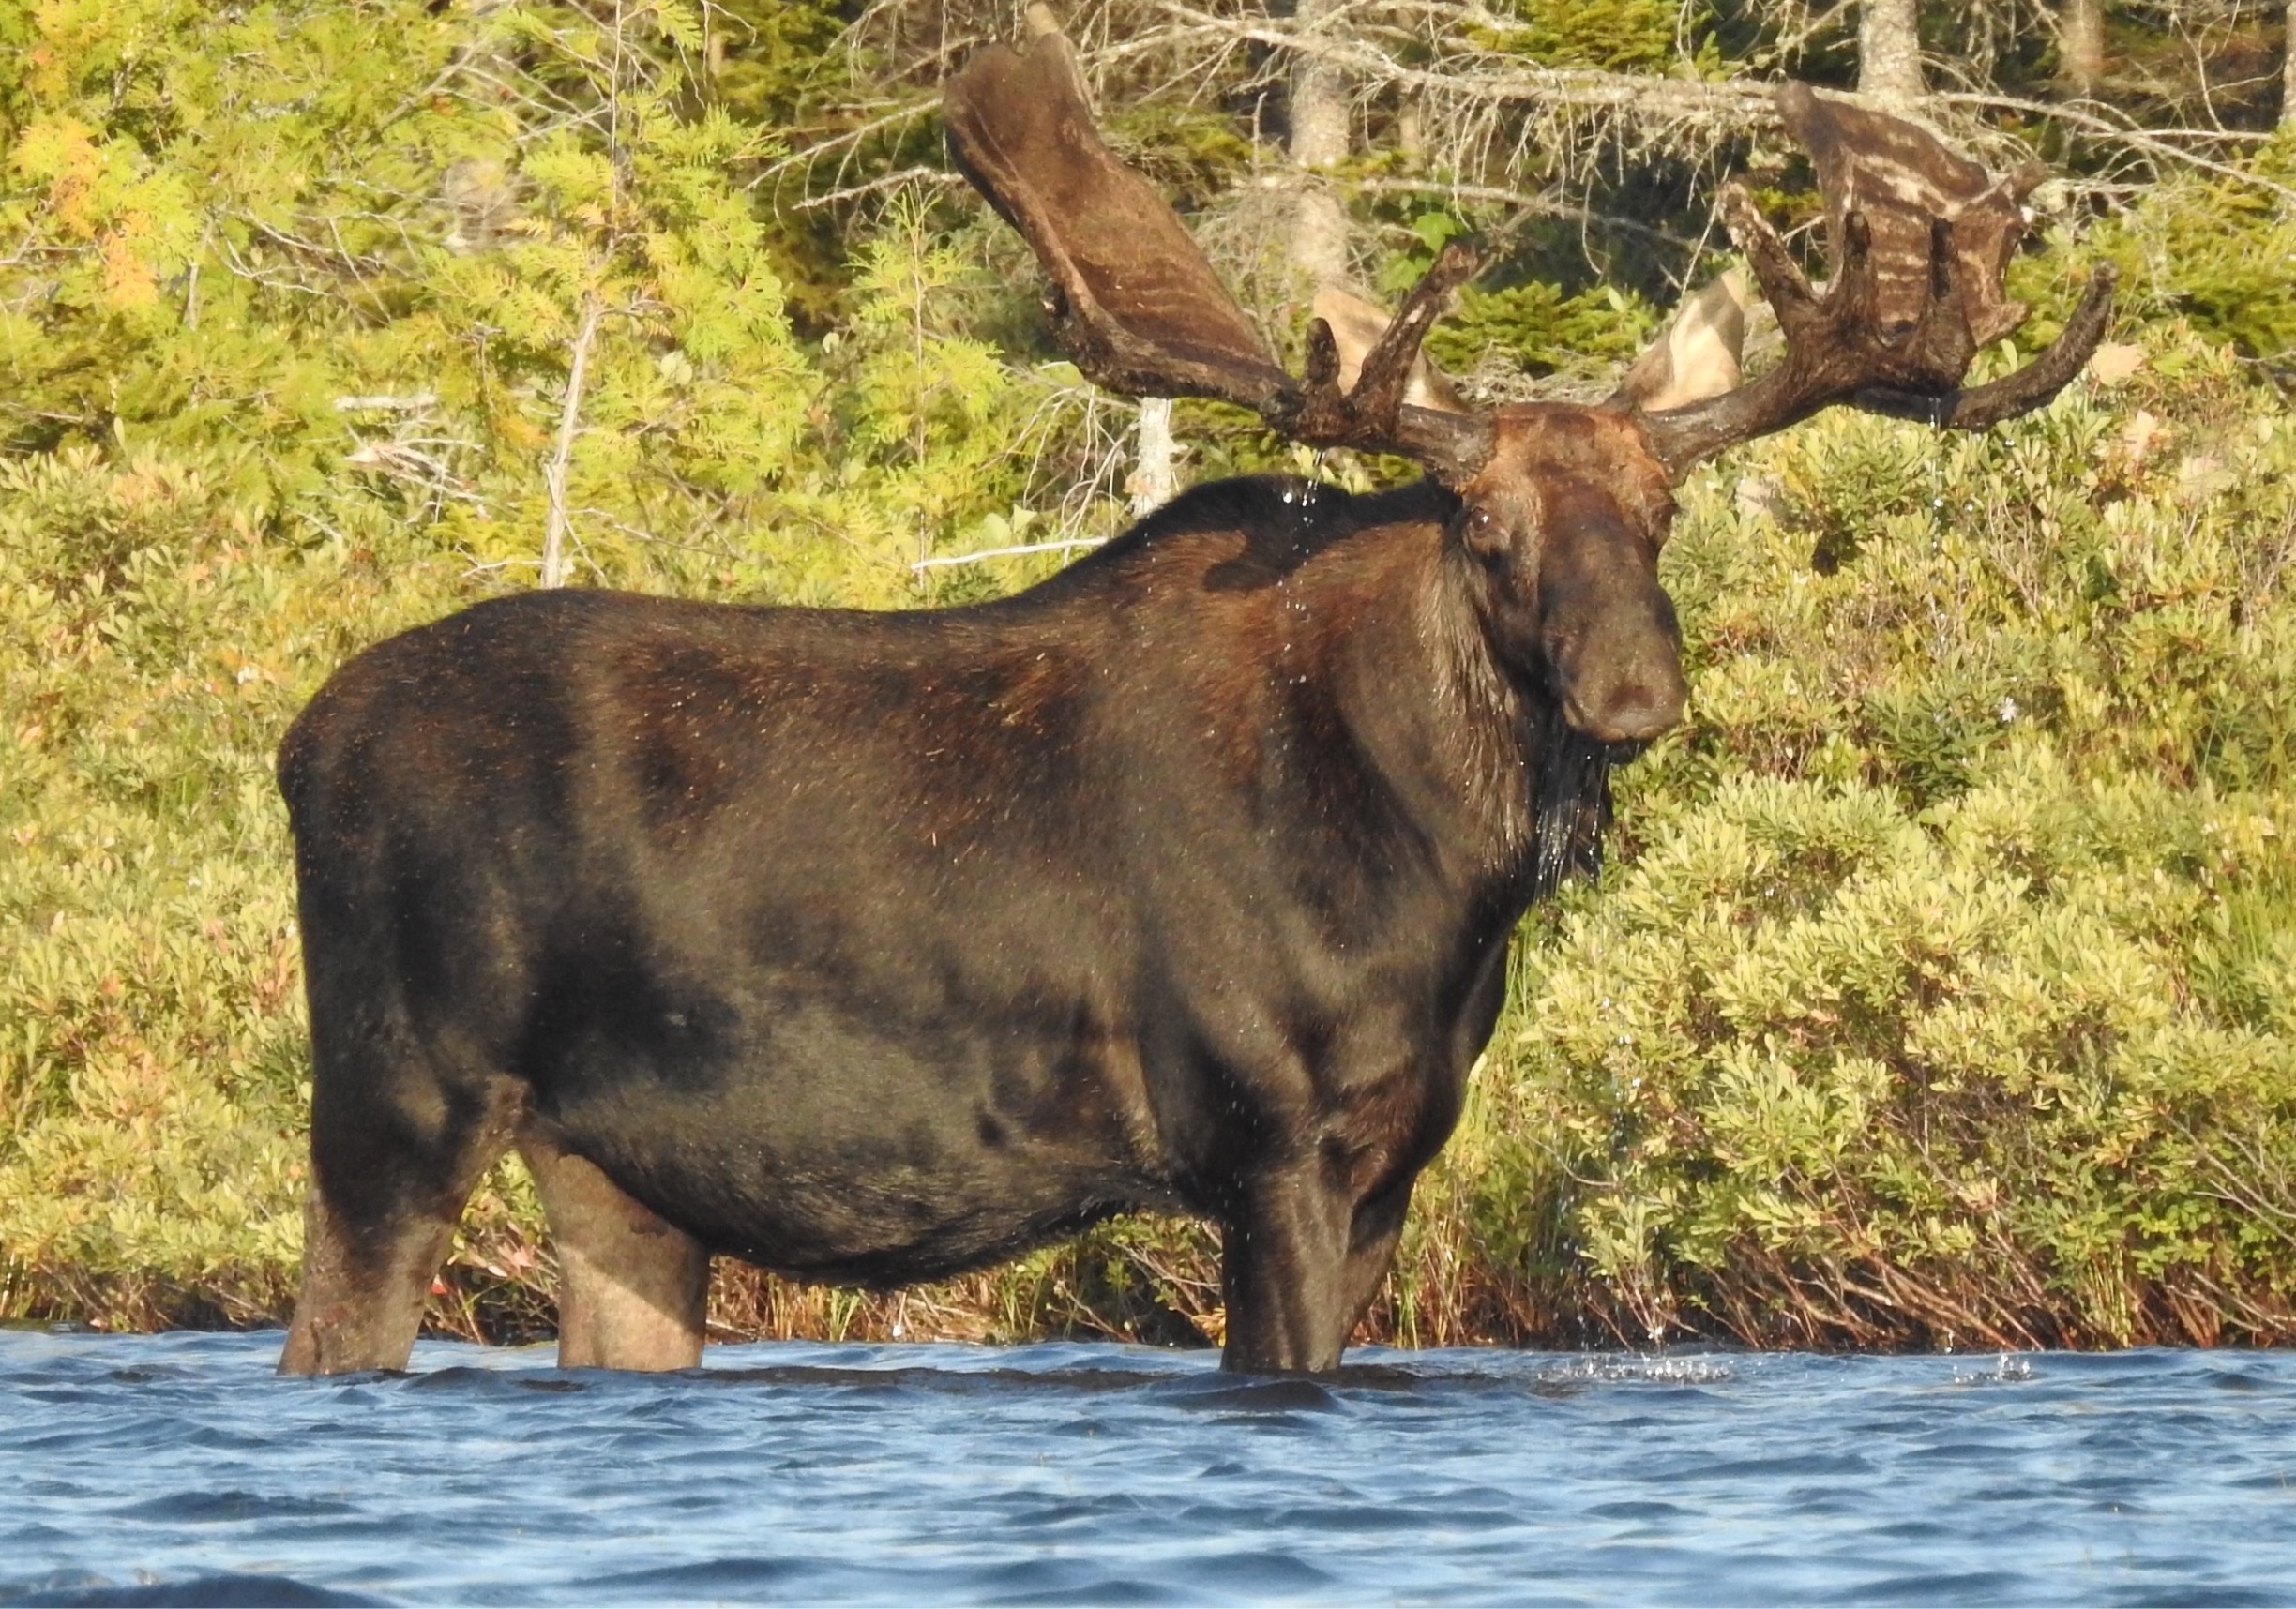 Northeast whitewater outfitters offered a great moose tour. Found this bull while exploring the lake in our canoes. Gorgeous!